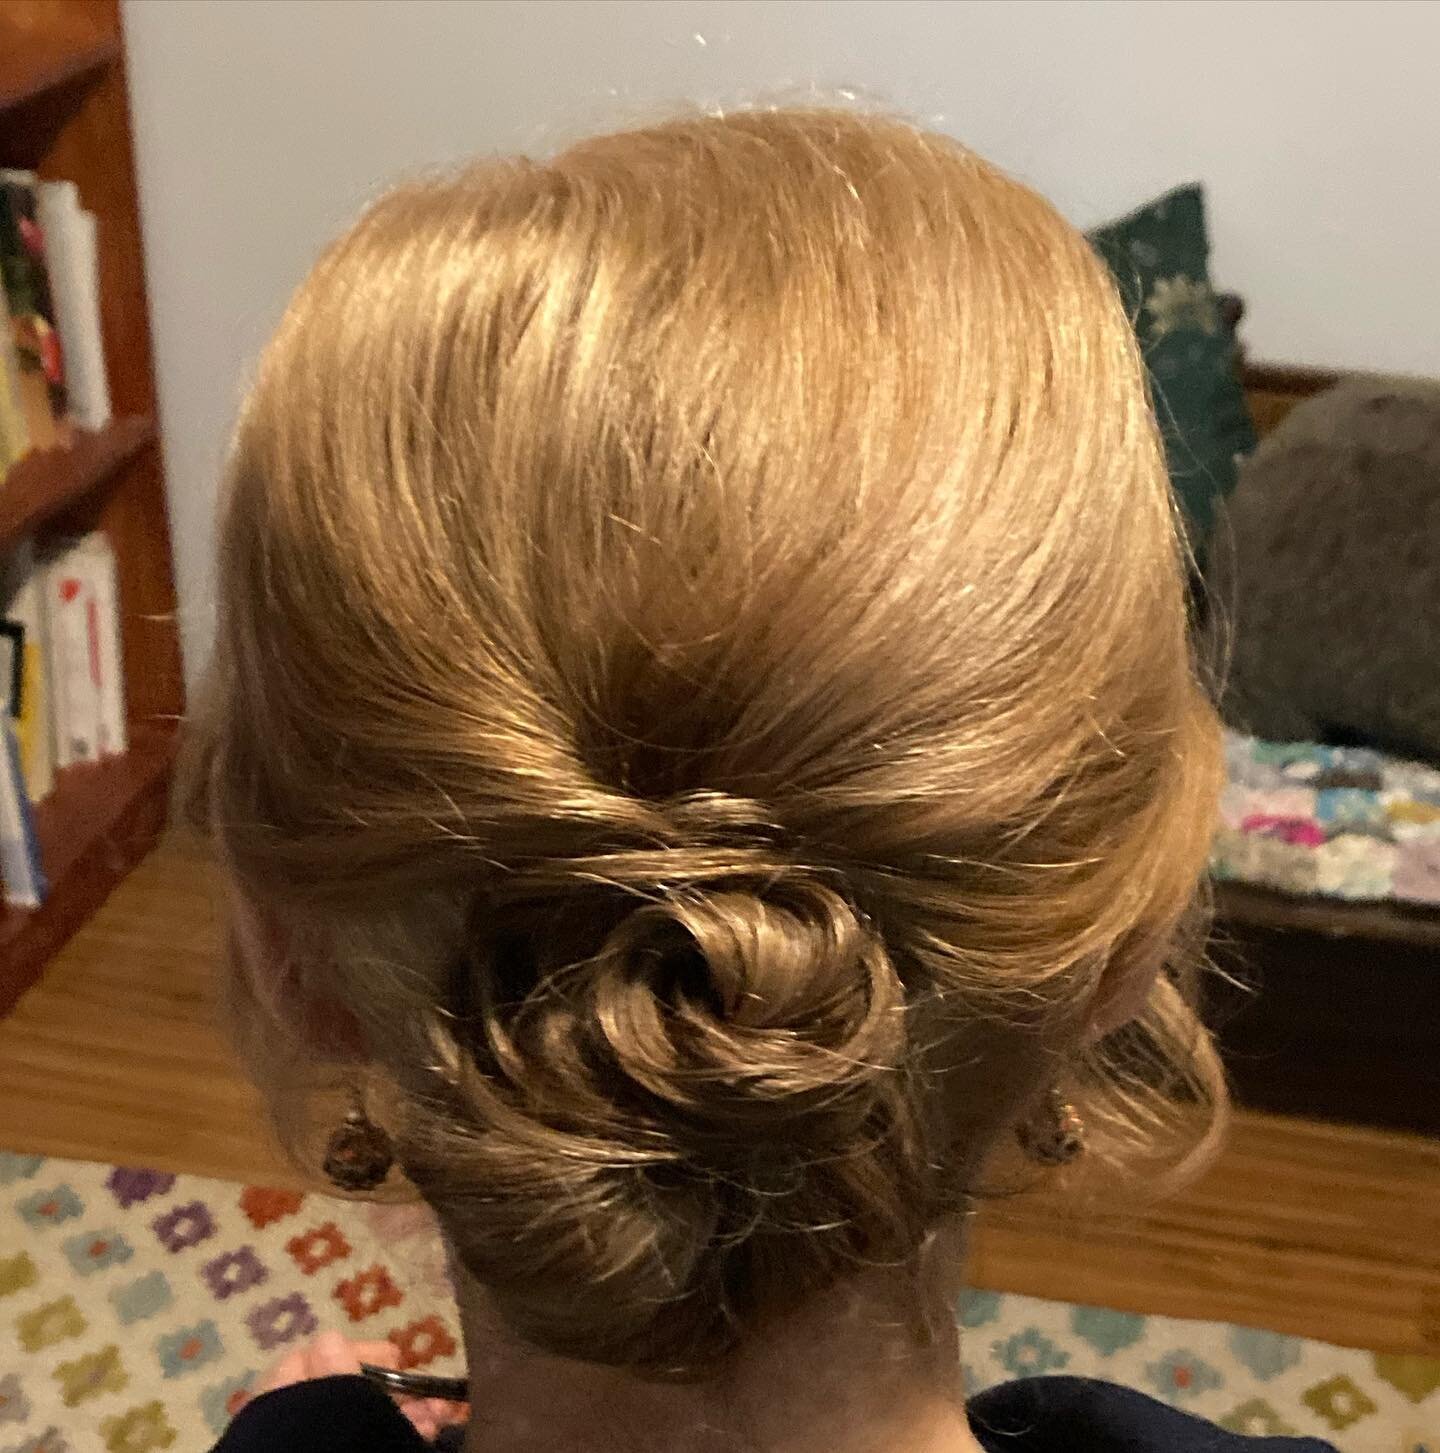 Soft mother of the bride twisted upstyle - using @ghdhair_anz curly ever after and classic curl tong. 
.
.
.
.

 #melbournebride #engaged #naturalmakeup #bridalhairandmakeupartist #realbrides #melbournehmua #weddinghairstylist #bohohairstyle
#halfuph